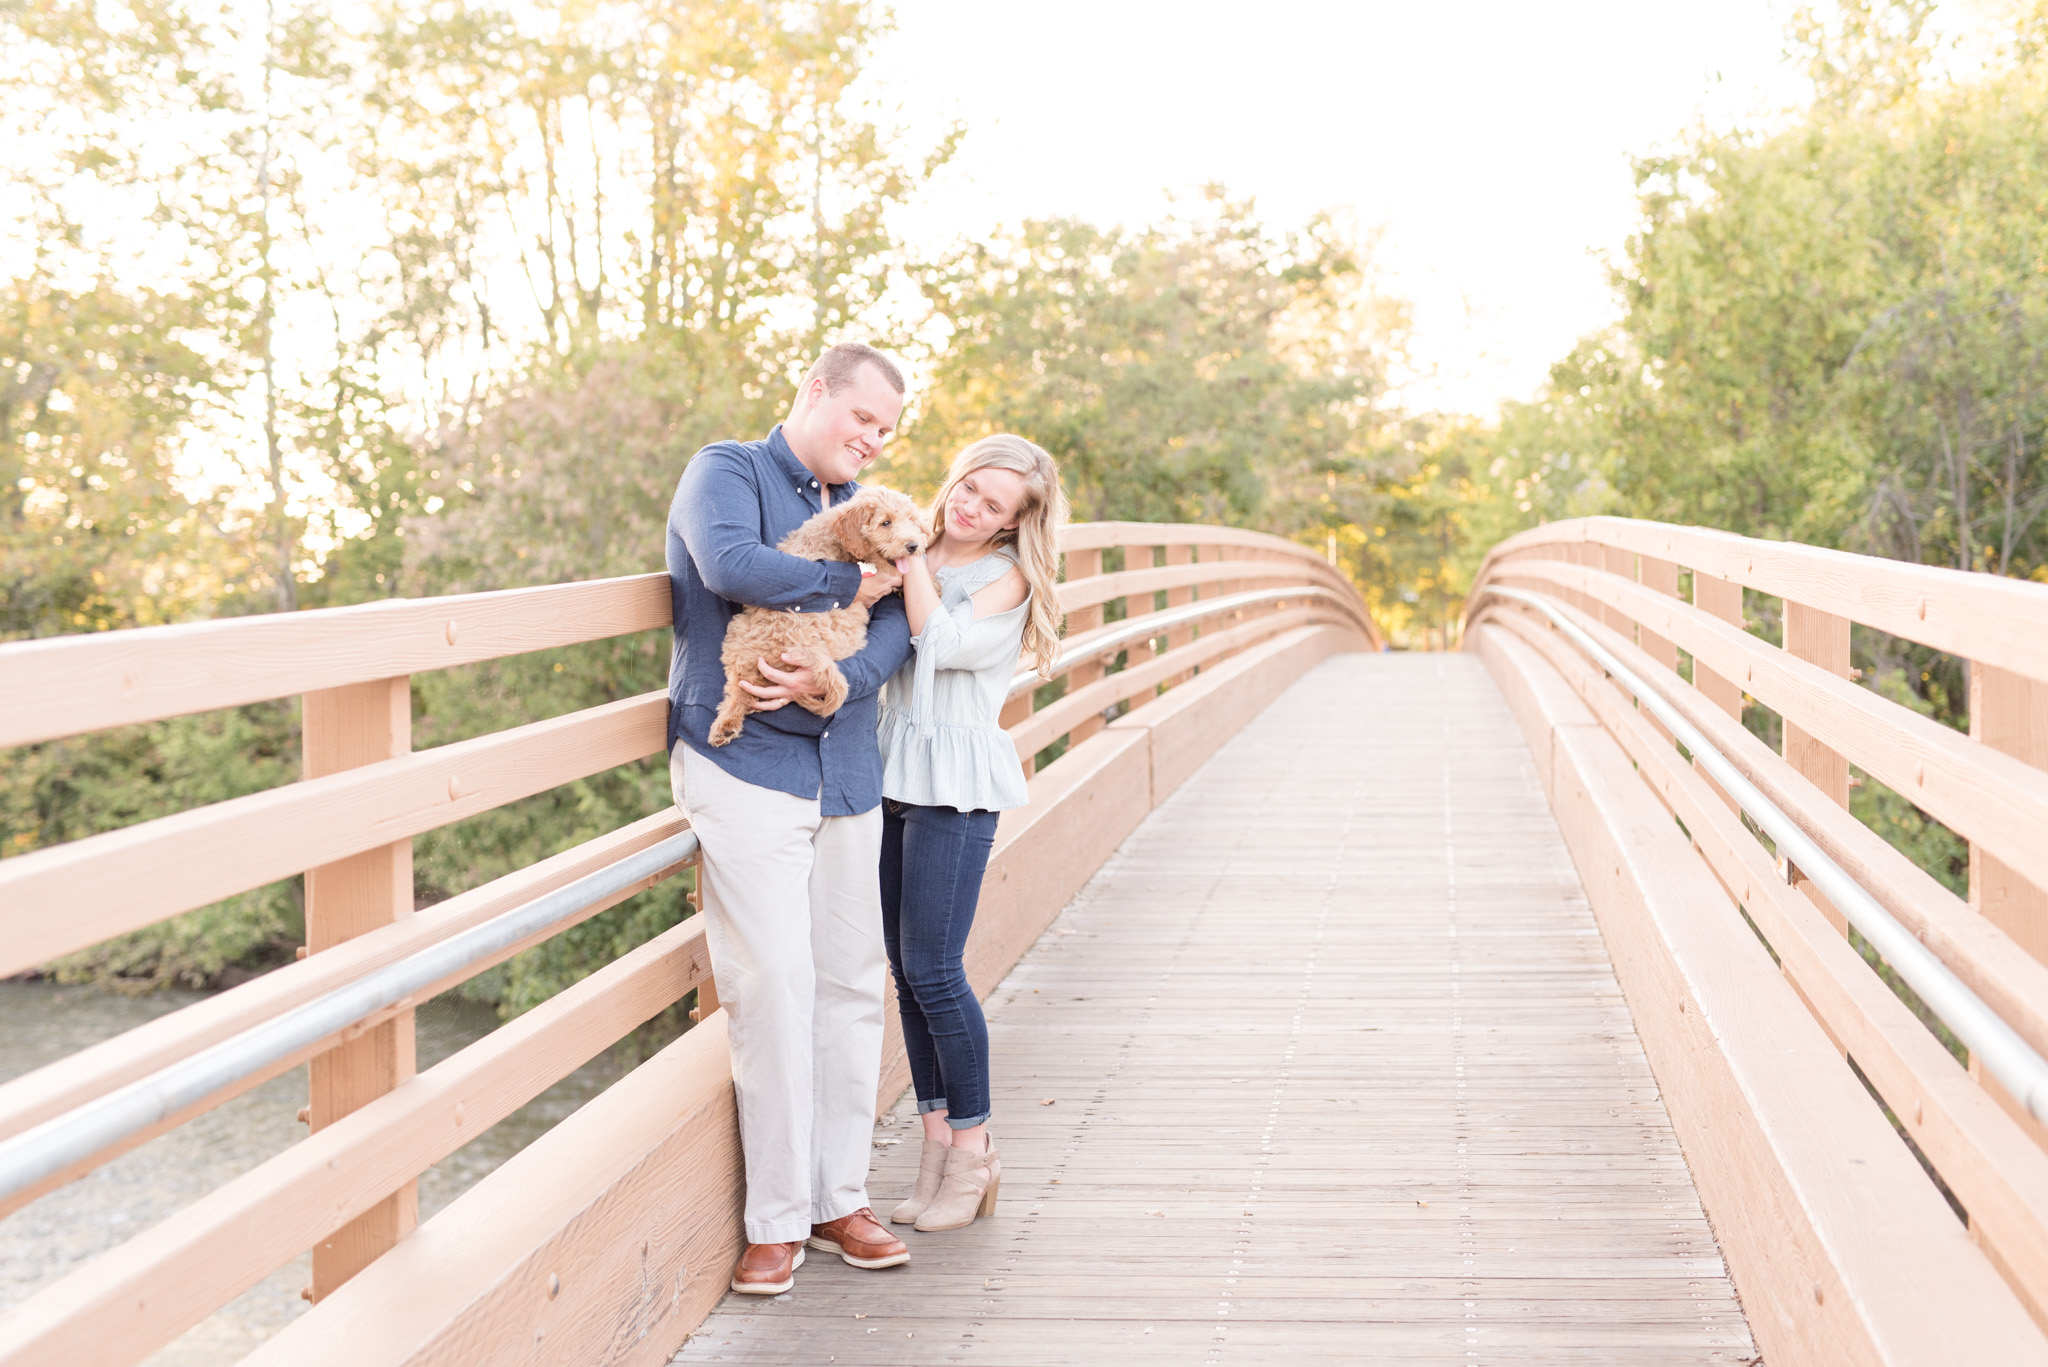 Couple looks at puppy while holding him on bridge.